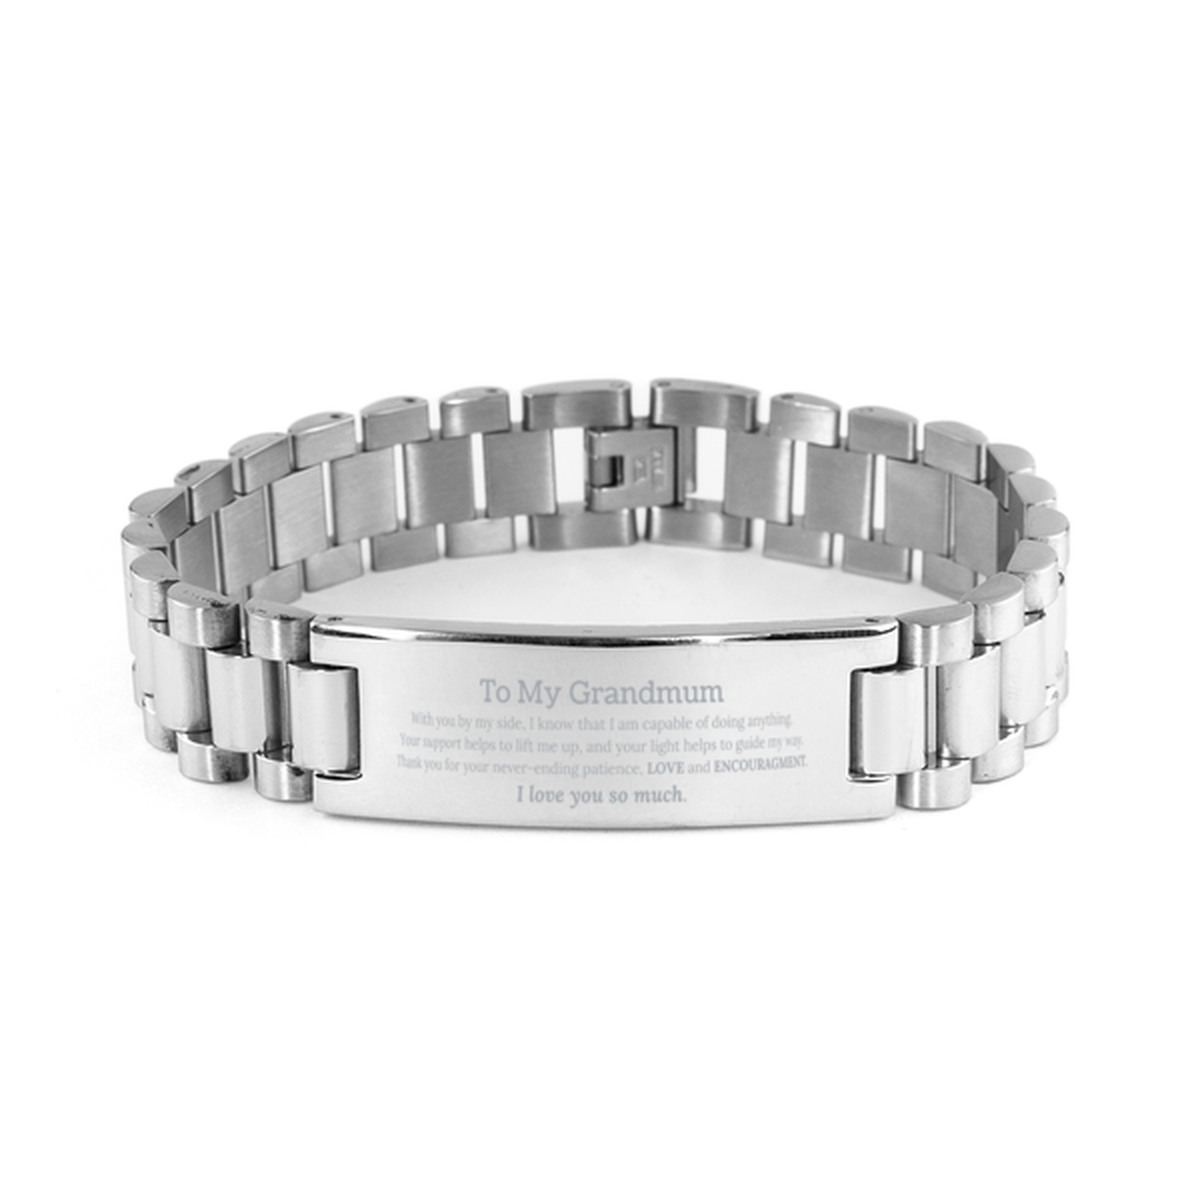 Appreciation Grandmum Ladder Stainless Steel Bracelet Gifts, To My Grandmum Birthday Christmas Wedding Keepsake Gifts for Grandmum With you by my side, I know that I am capable of doing anything. I love you so much